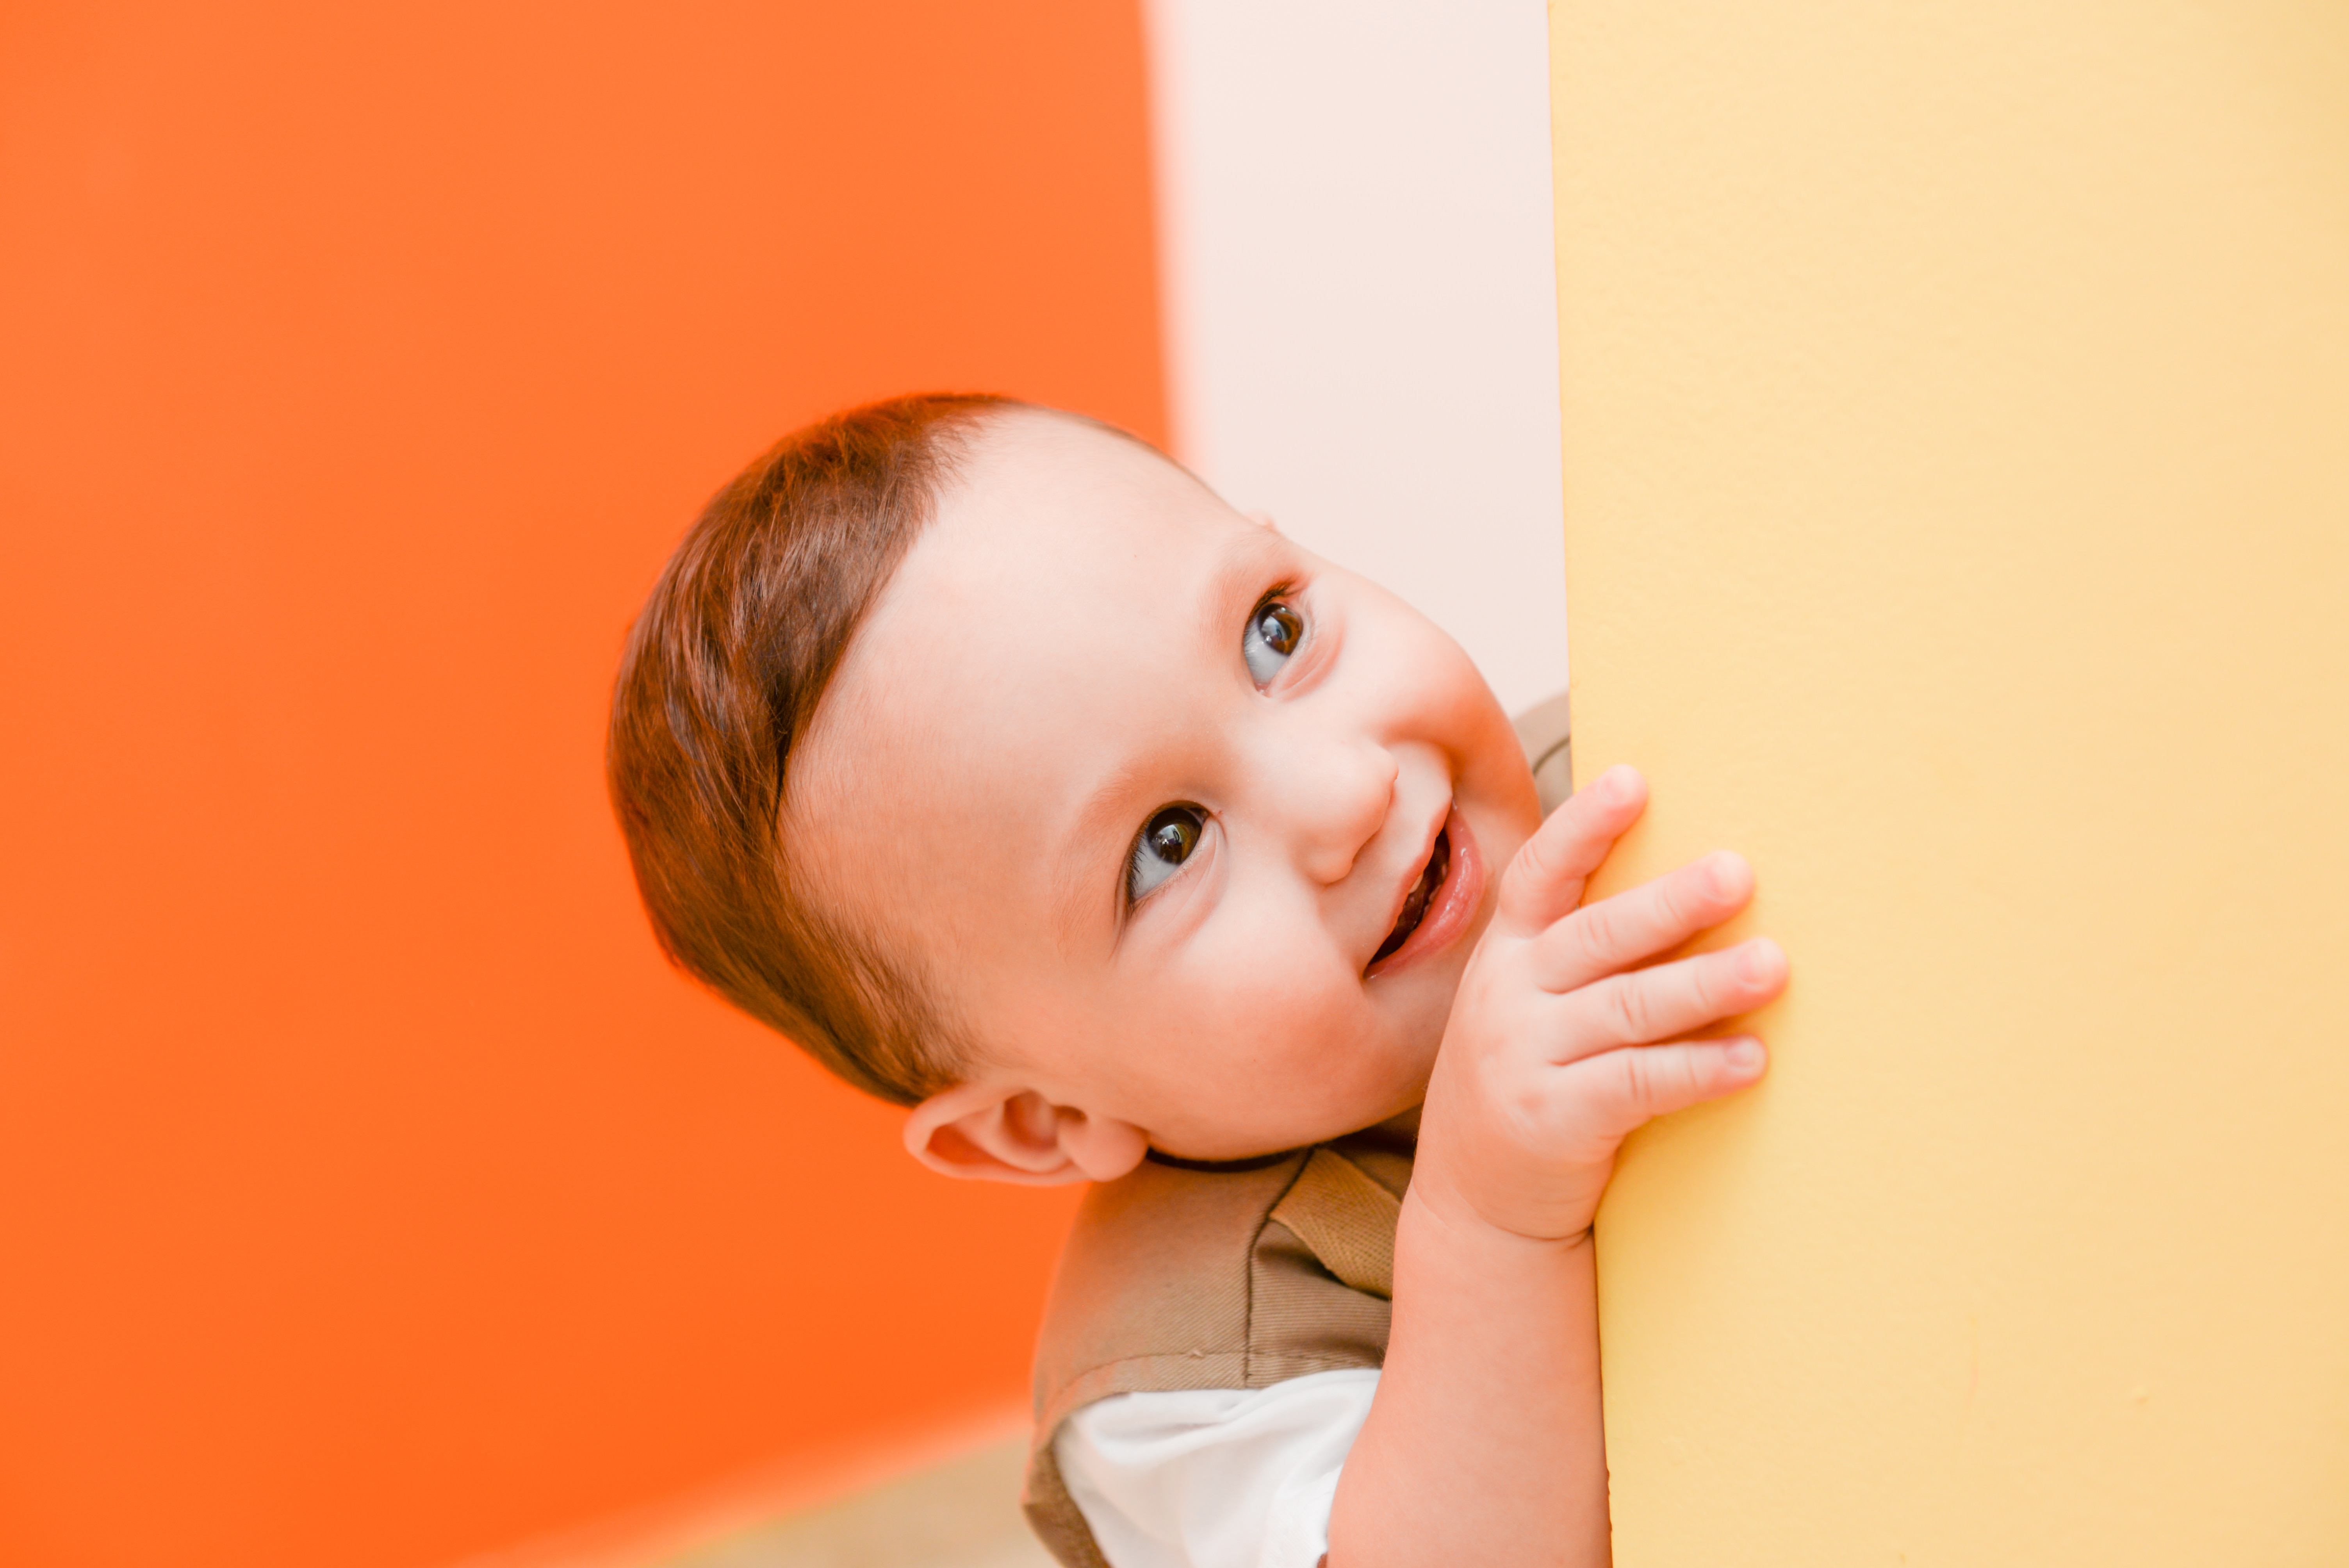 boy's grey and white shirt behind orange wall paint inside the room